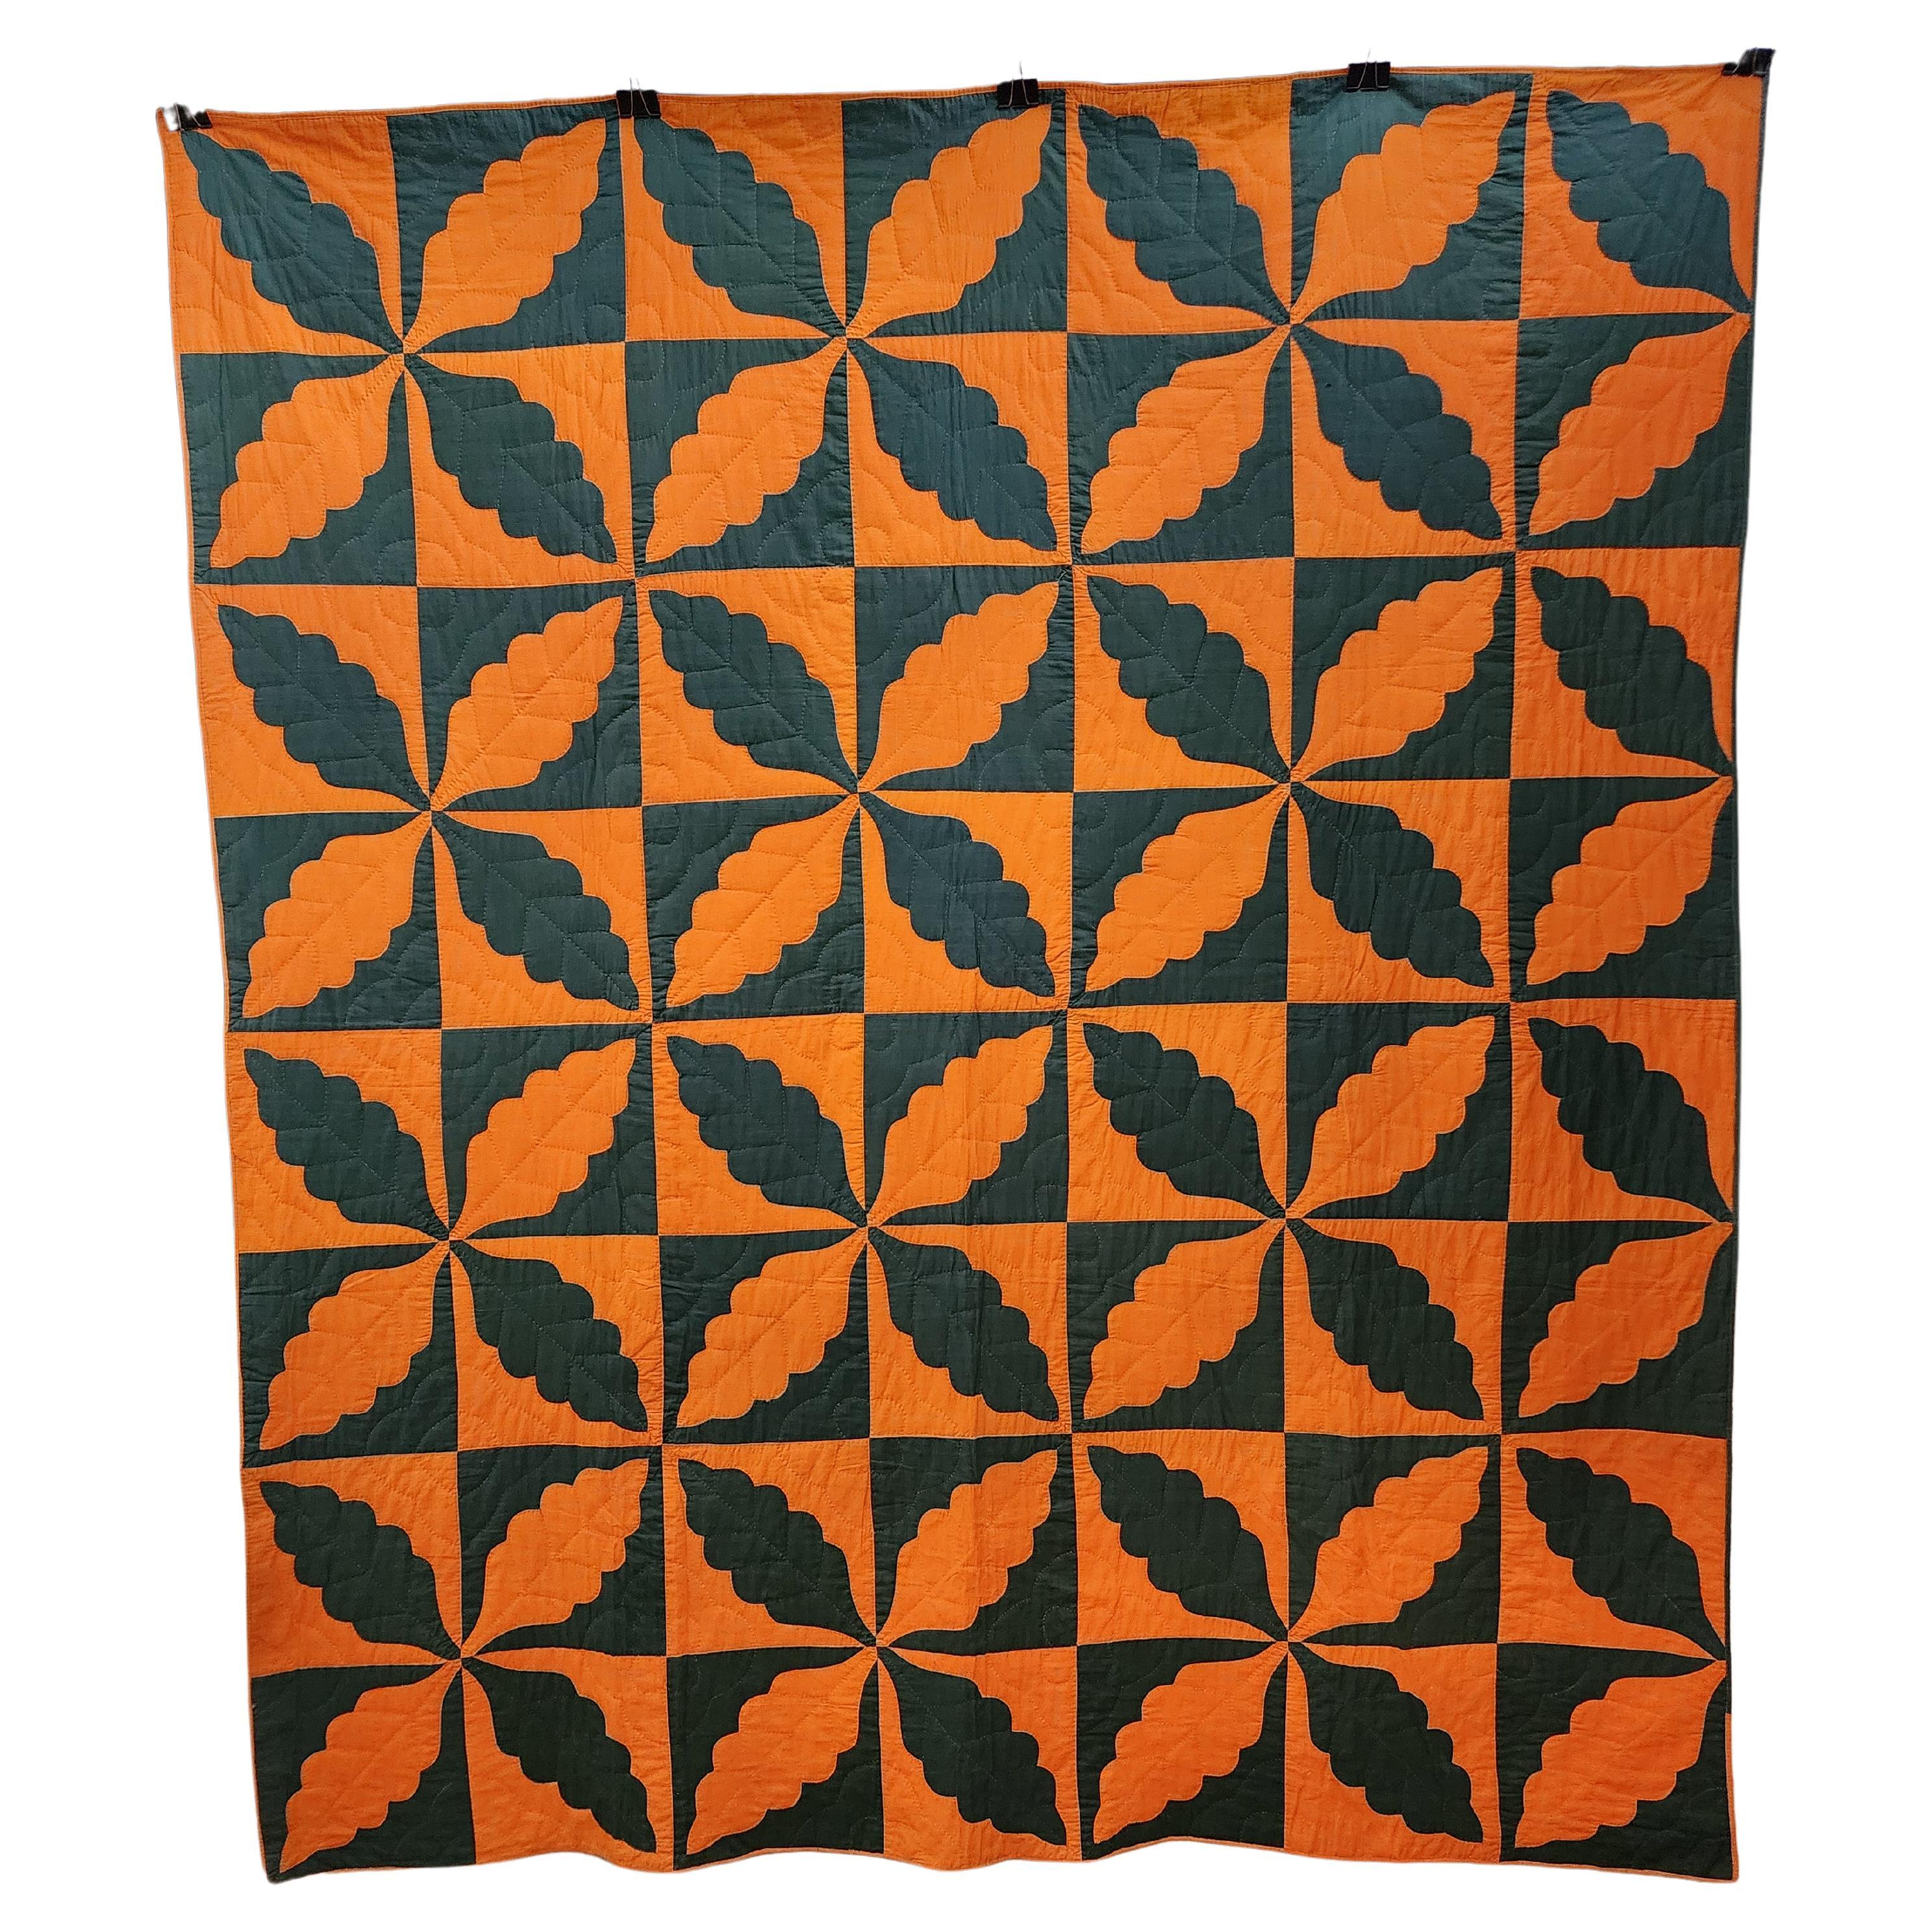 Striking and beautiful New England quilt with oakleaf pattern. Investor investive condition with a highly modernist design pattern. Found in Maine, this quilt made from pumpkin orange and a dark modeled blue green cotton and is in excellent